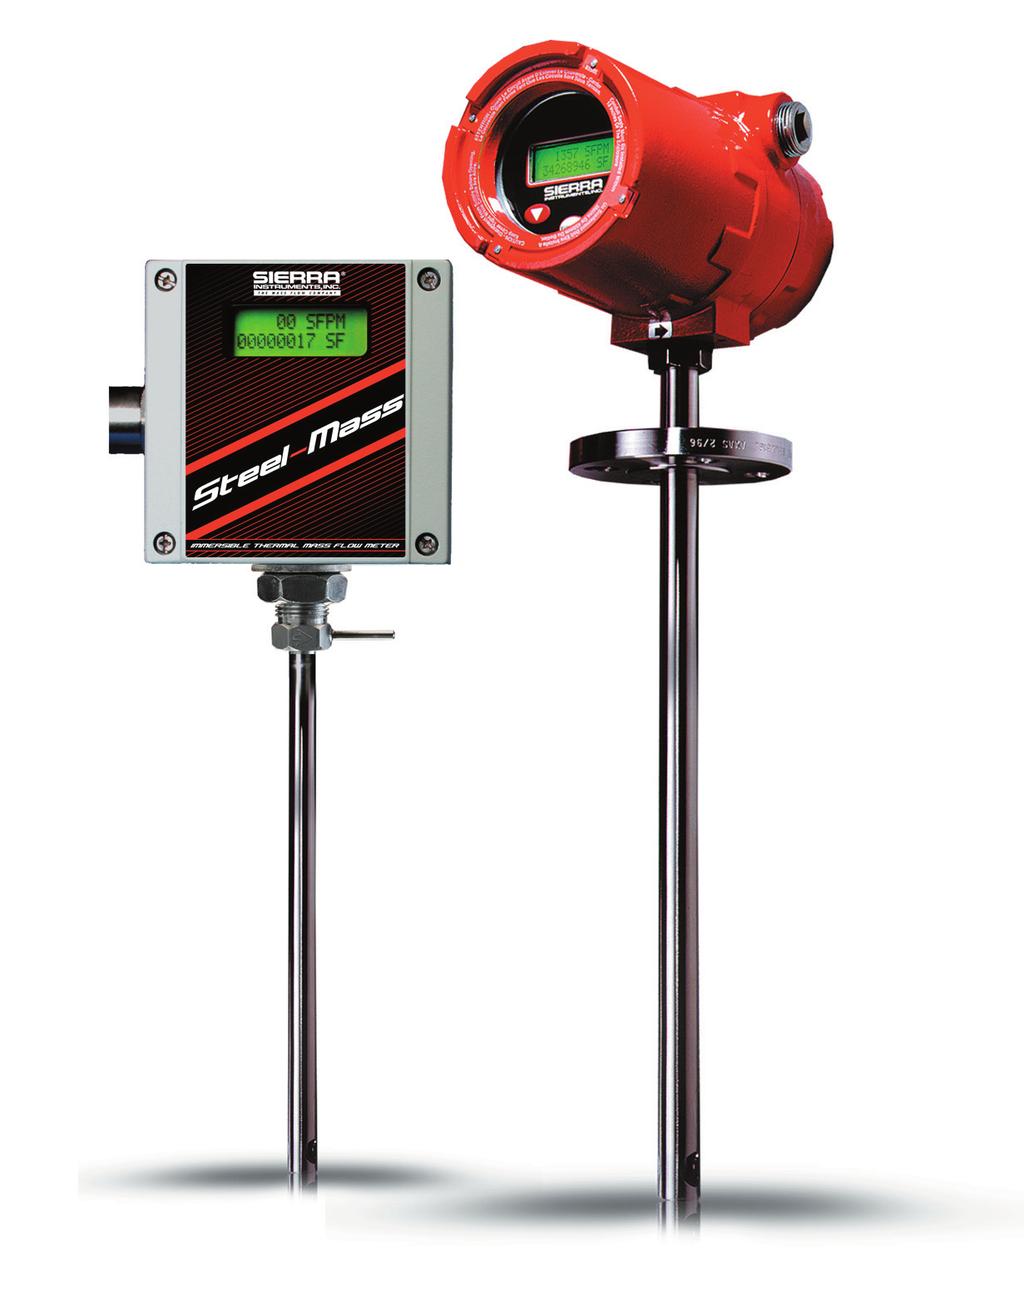 Immersible Thermal Gas Mass Flow Meter Direct mass flow monitoring eliminates need for separate temperature and pressure inputs Accuracy +/- 1% of reading plus 0.